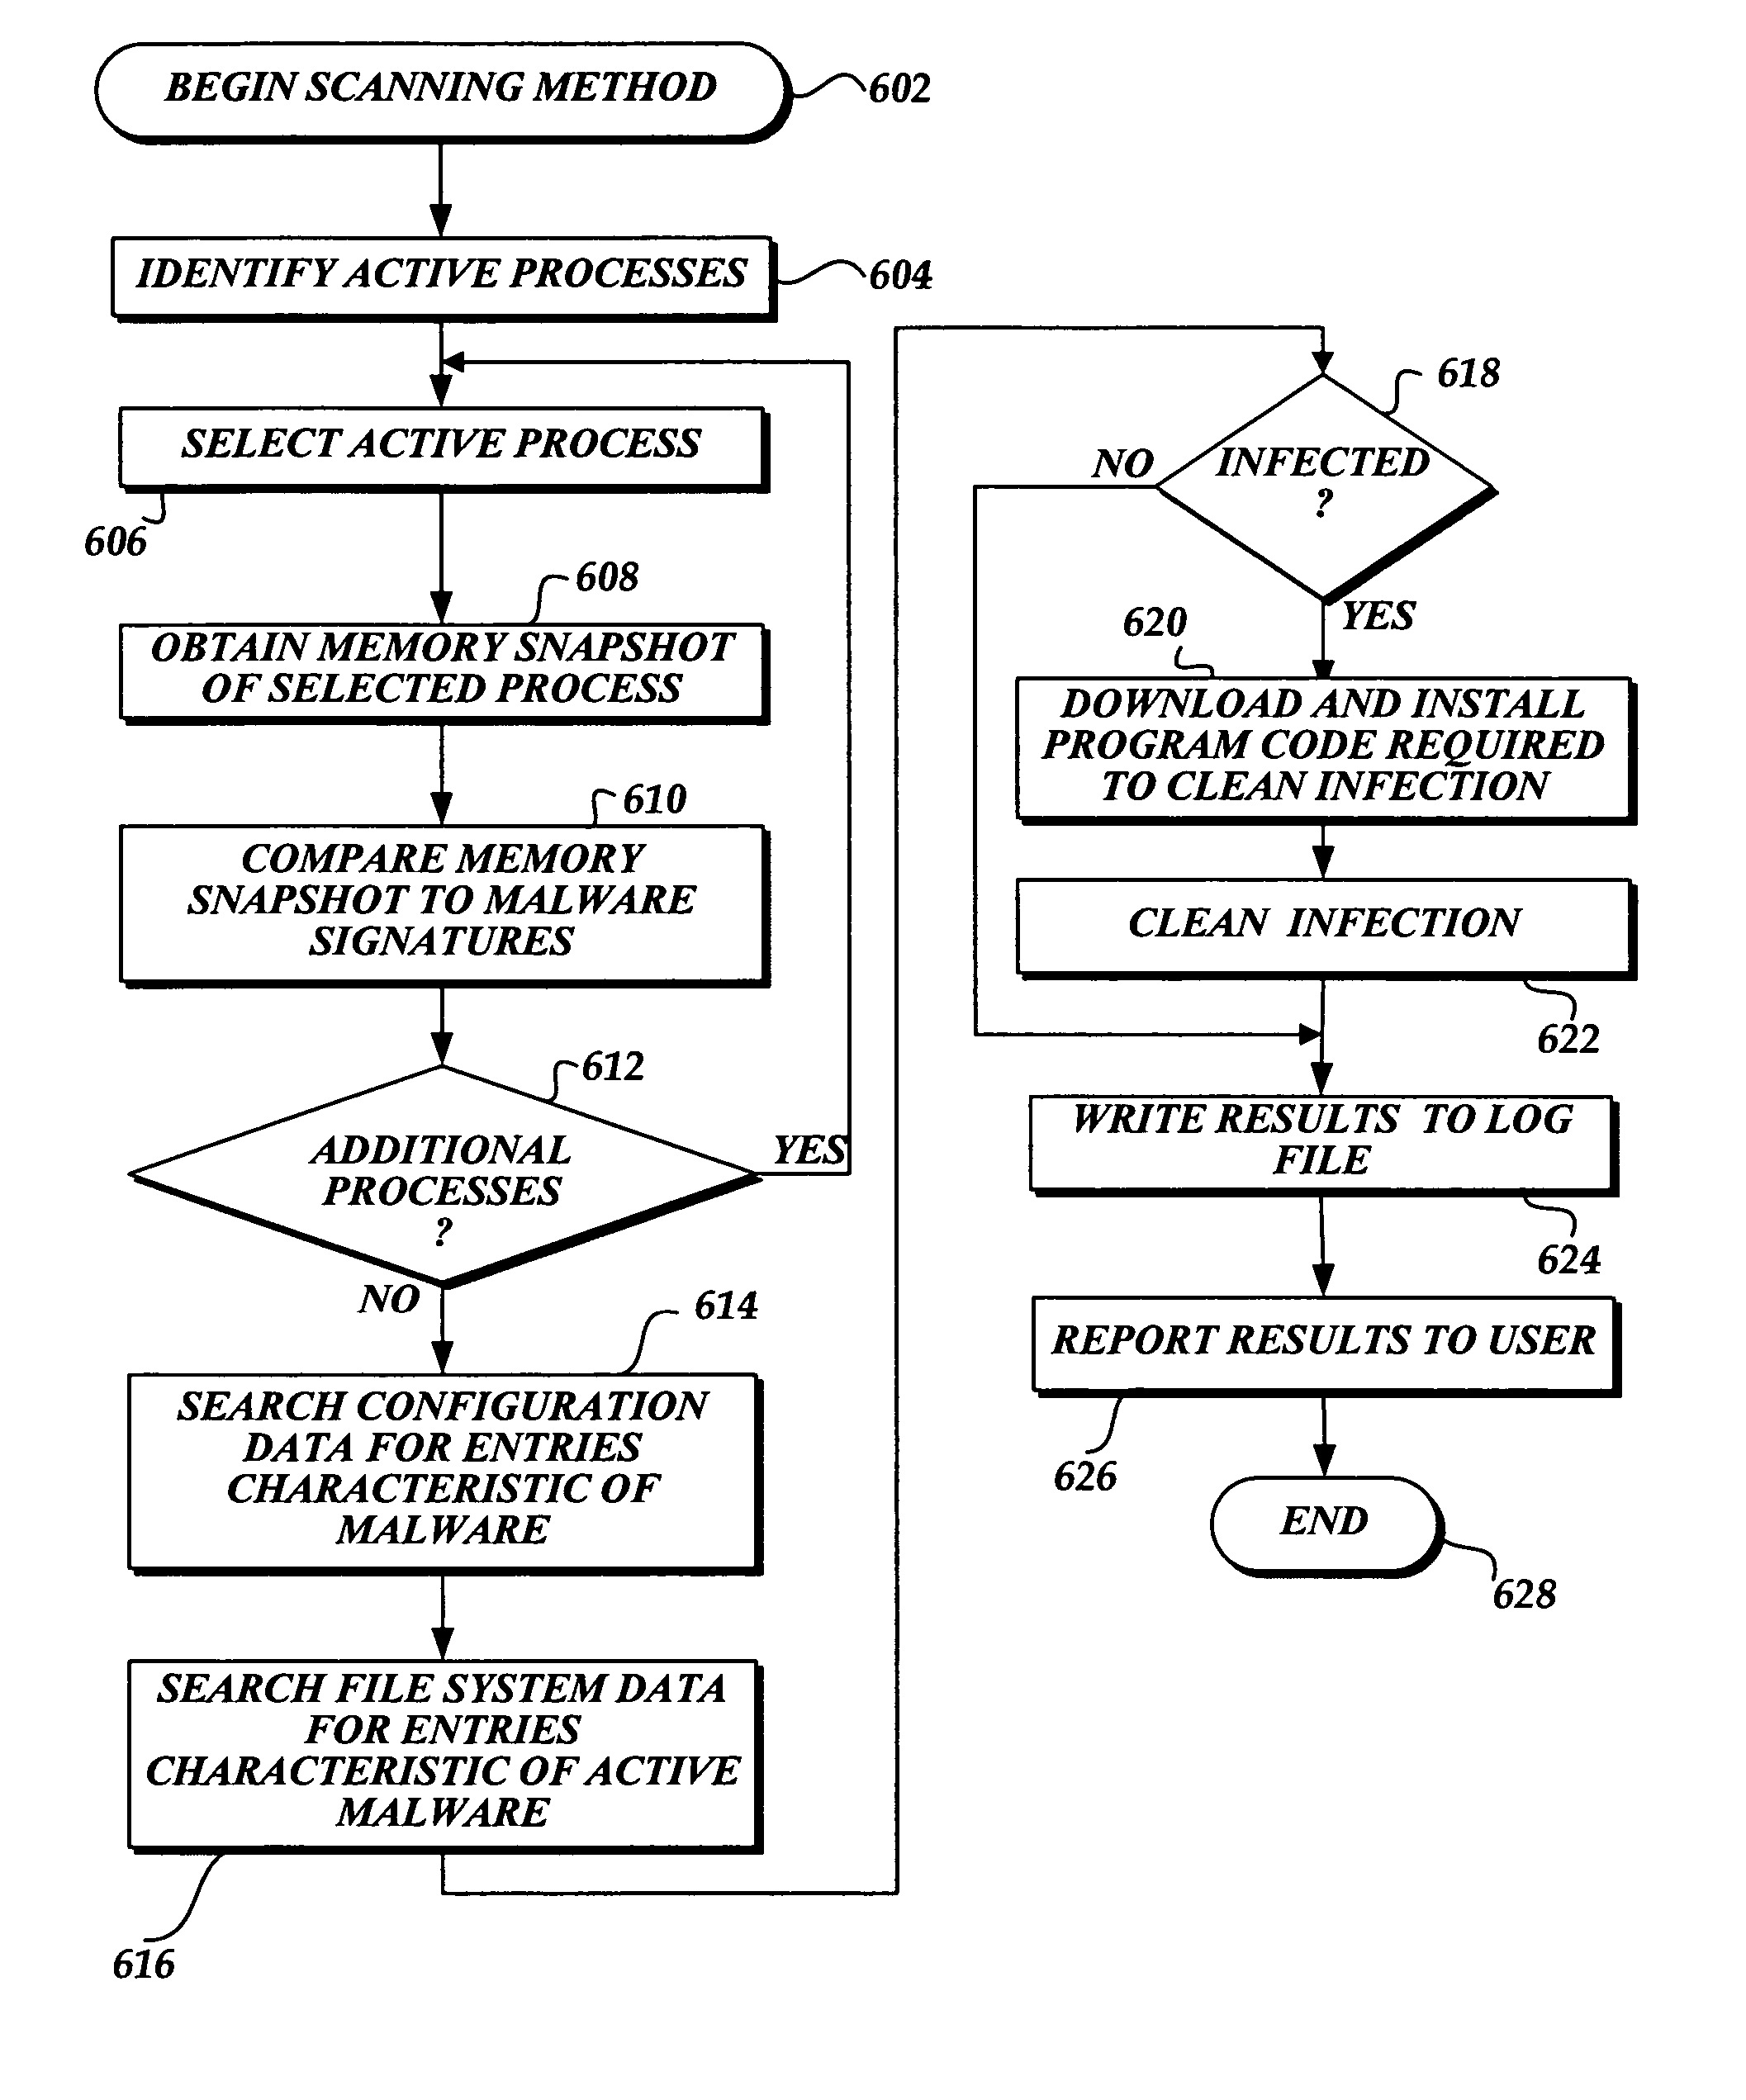 System and method of efficiently identifying and removing active malware from a computer